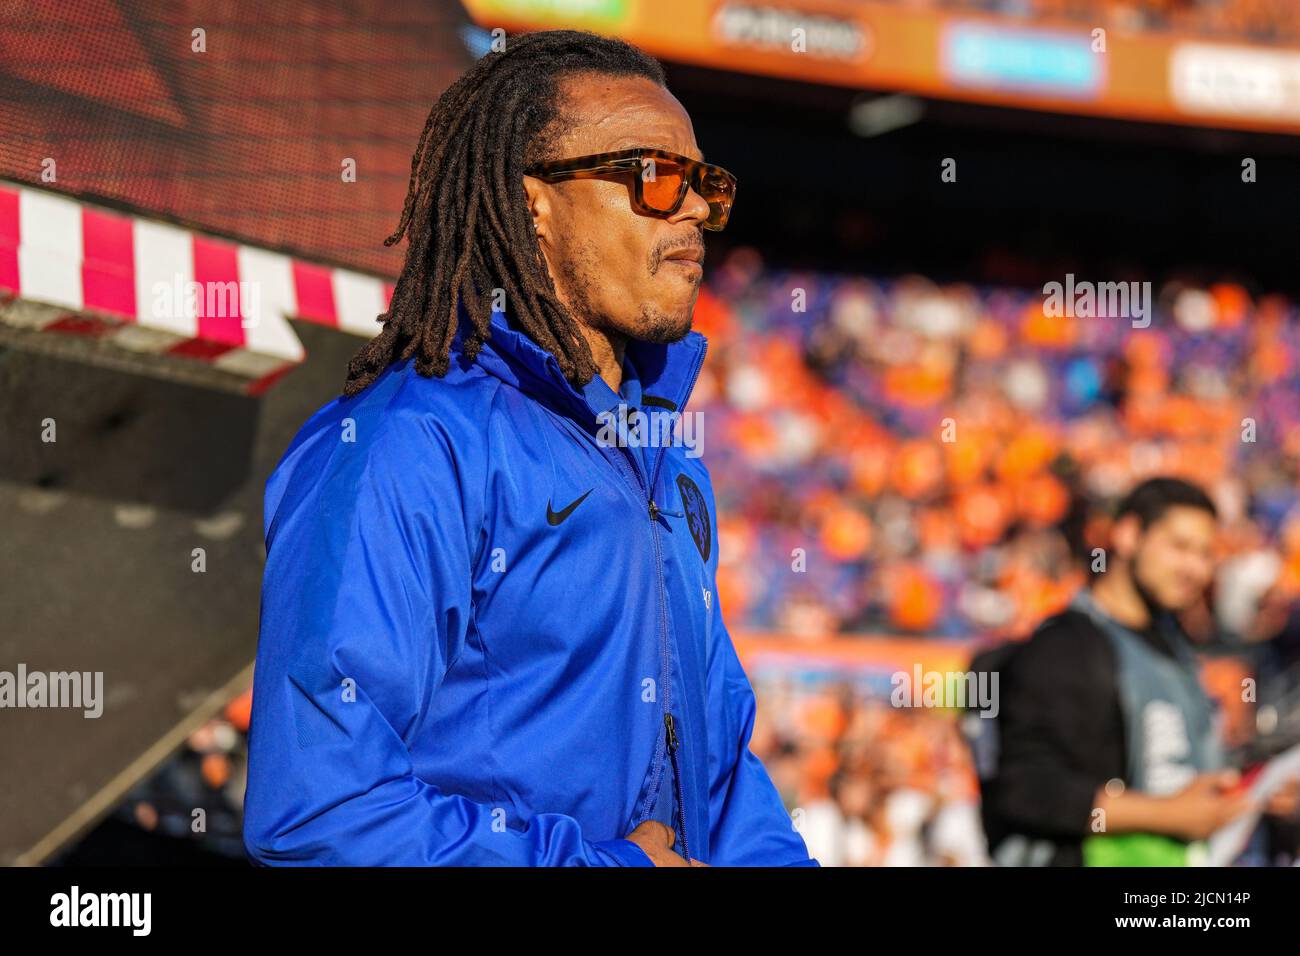 Rotterdam, Netherlands. 14 June 2022, Rotterdam, Netherlands. 14 June 2022, Assistant-trainer Edgar Davids during the match between Holland v Wales at Stadion Feijenoord de Kuip on 14 June 2022 in Rotterdam, Netherlands. (Box to Box Pictures/Yannick Verhoeven) Stock Photo